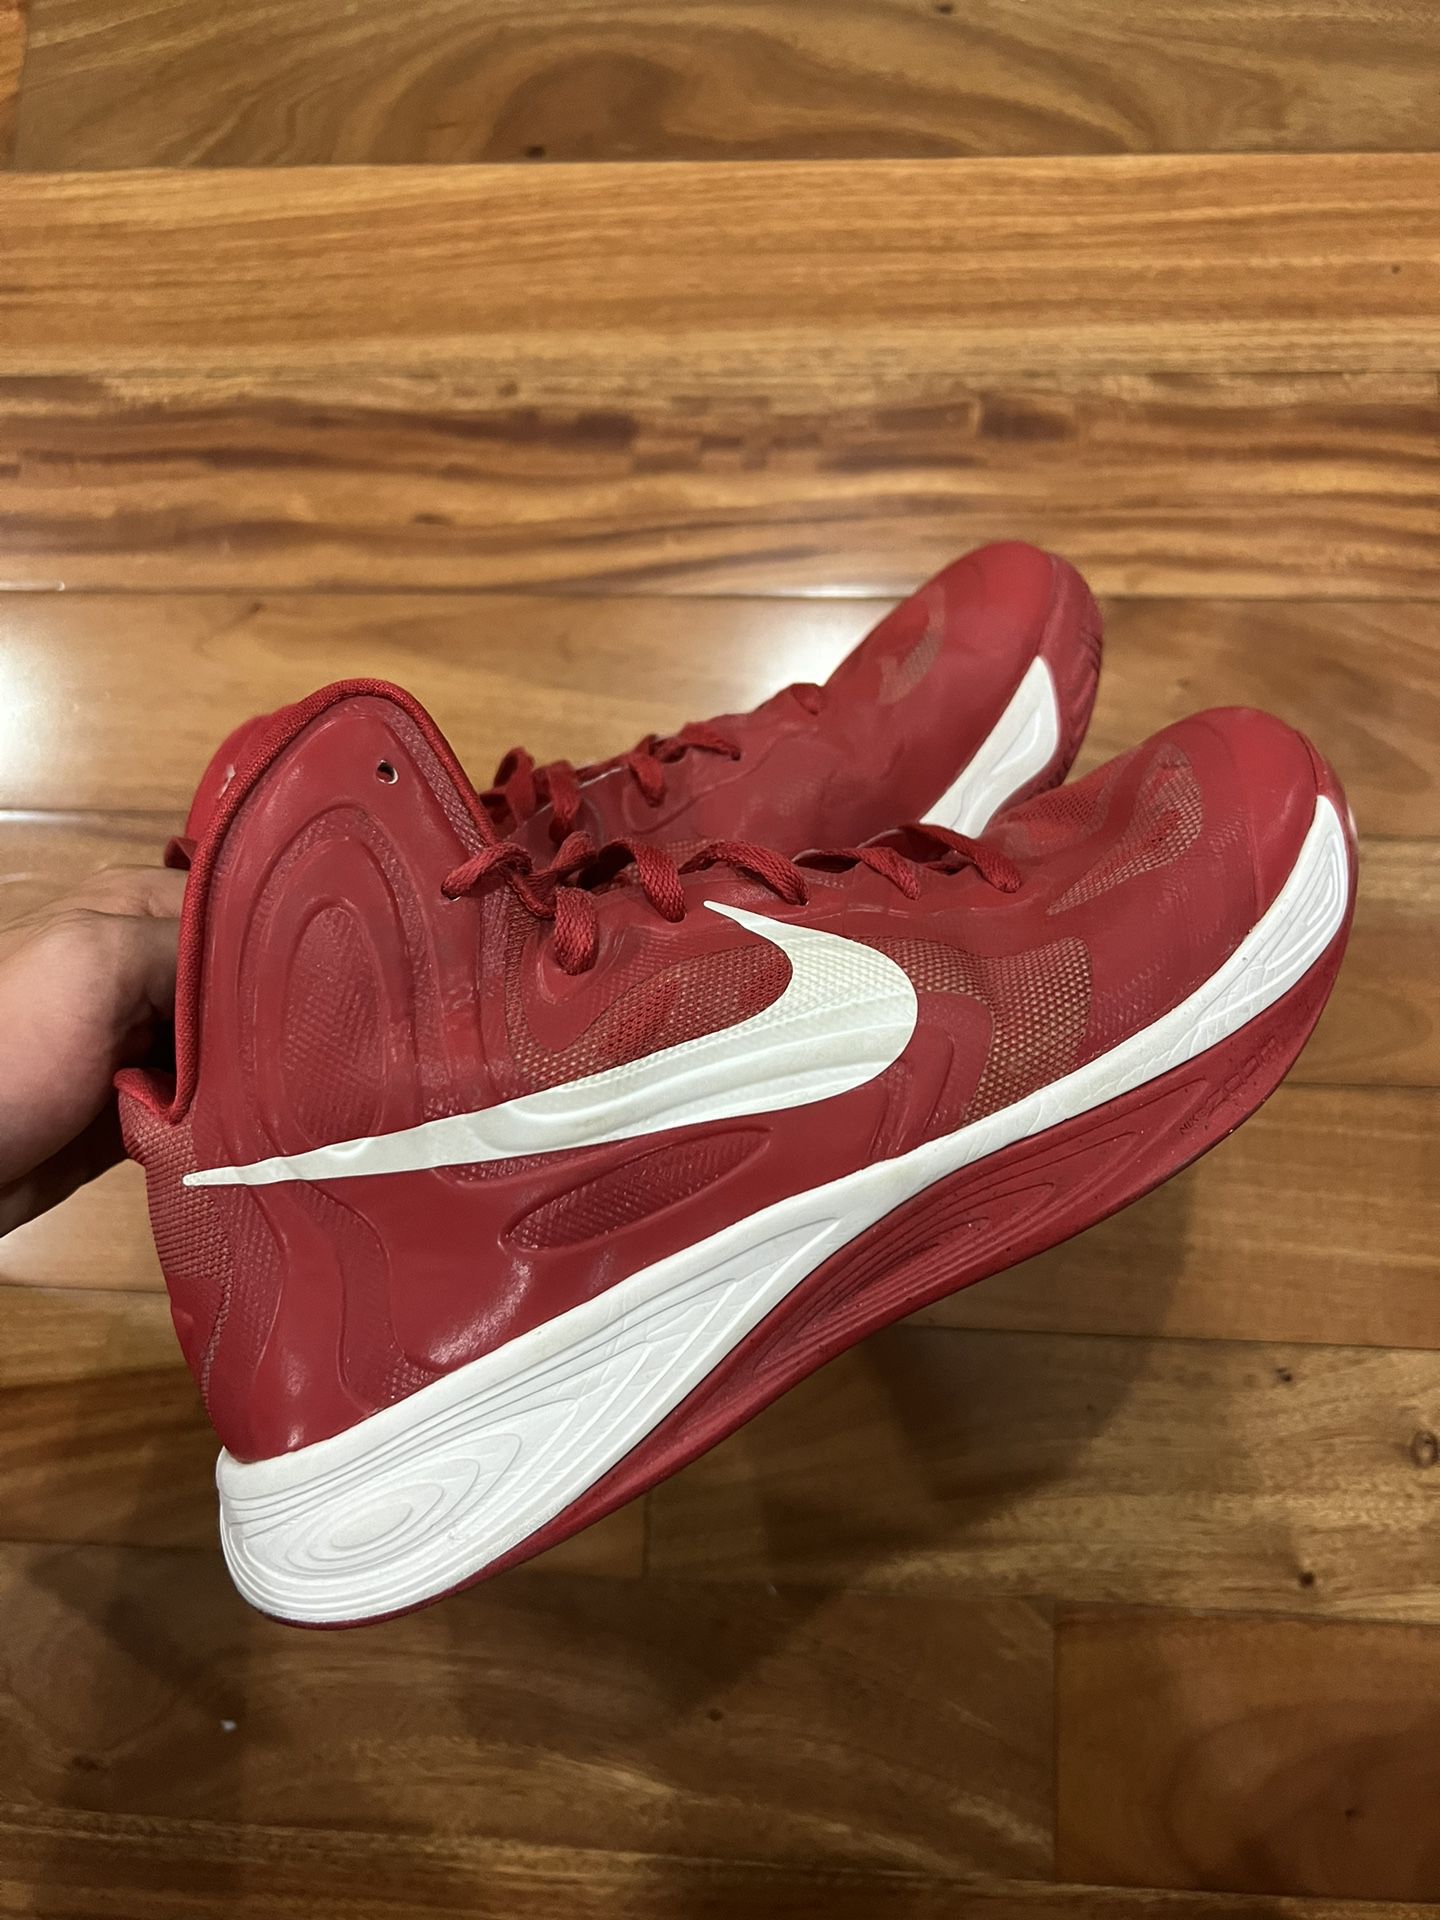 Nike Basketball Shoes for Sale in Diego, CA - OfferUp